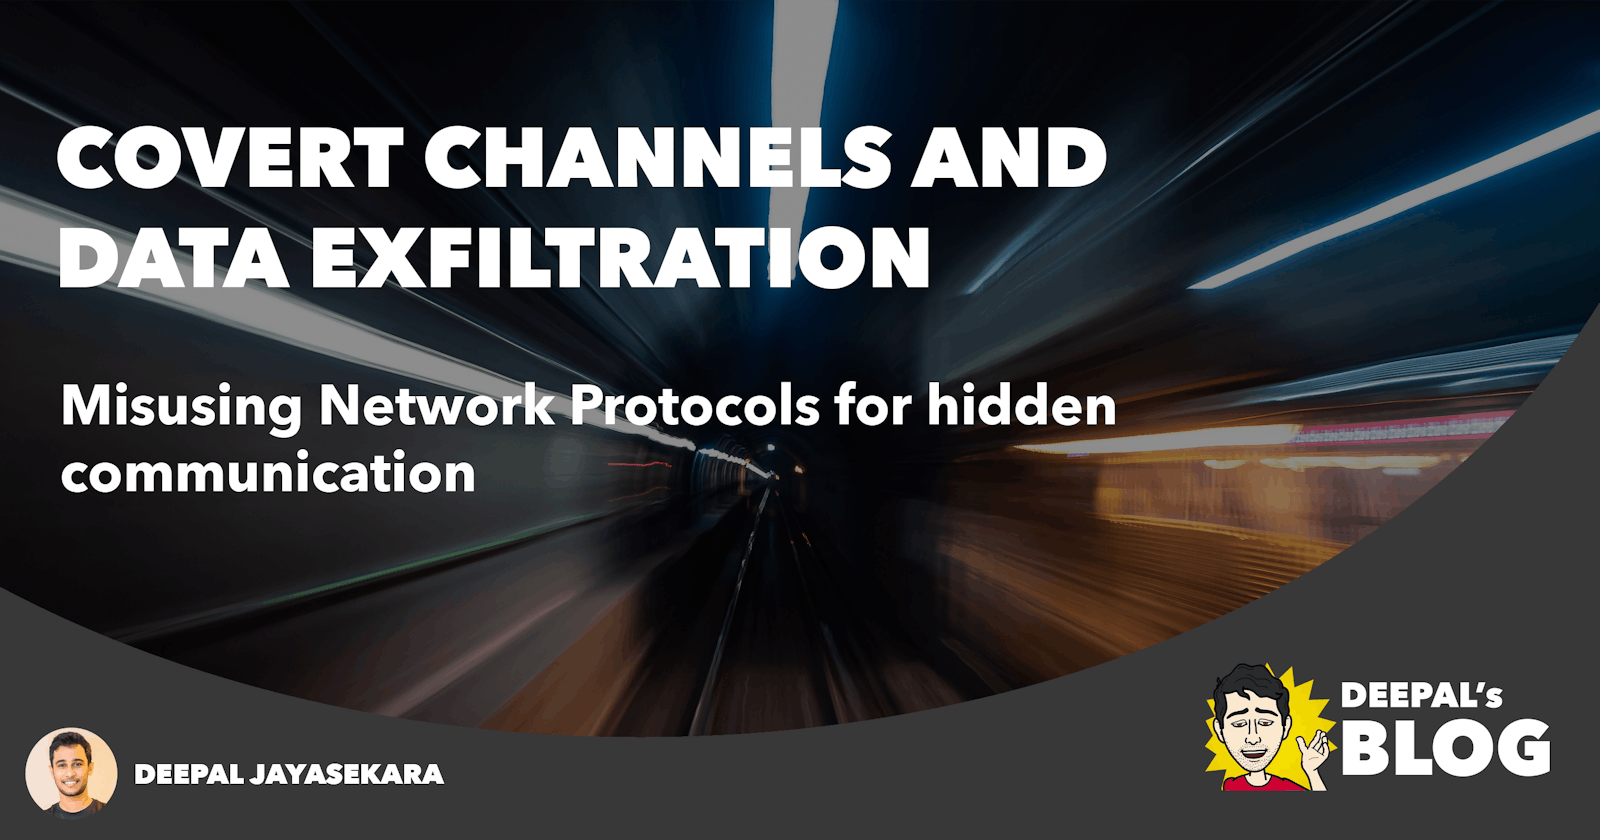 Covert Channels and Data Exfiltration